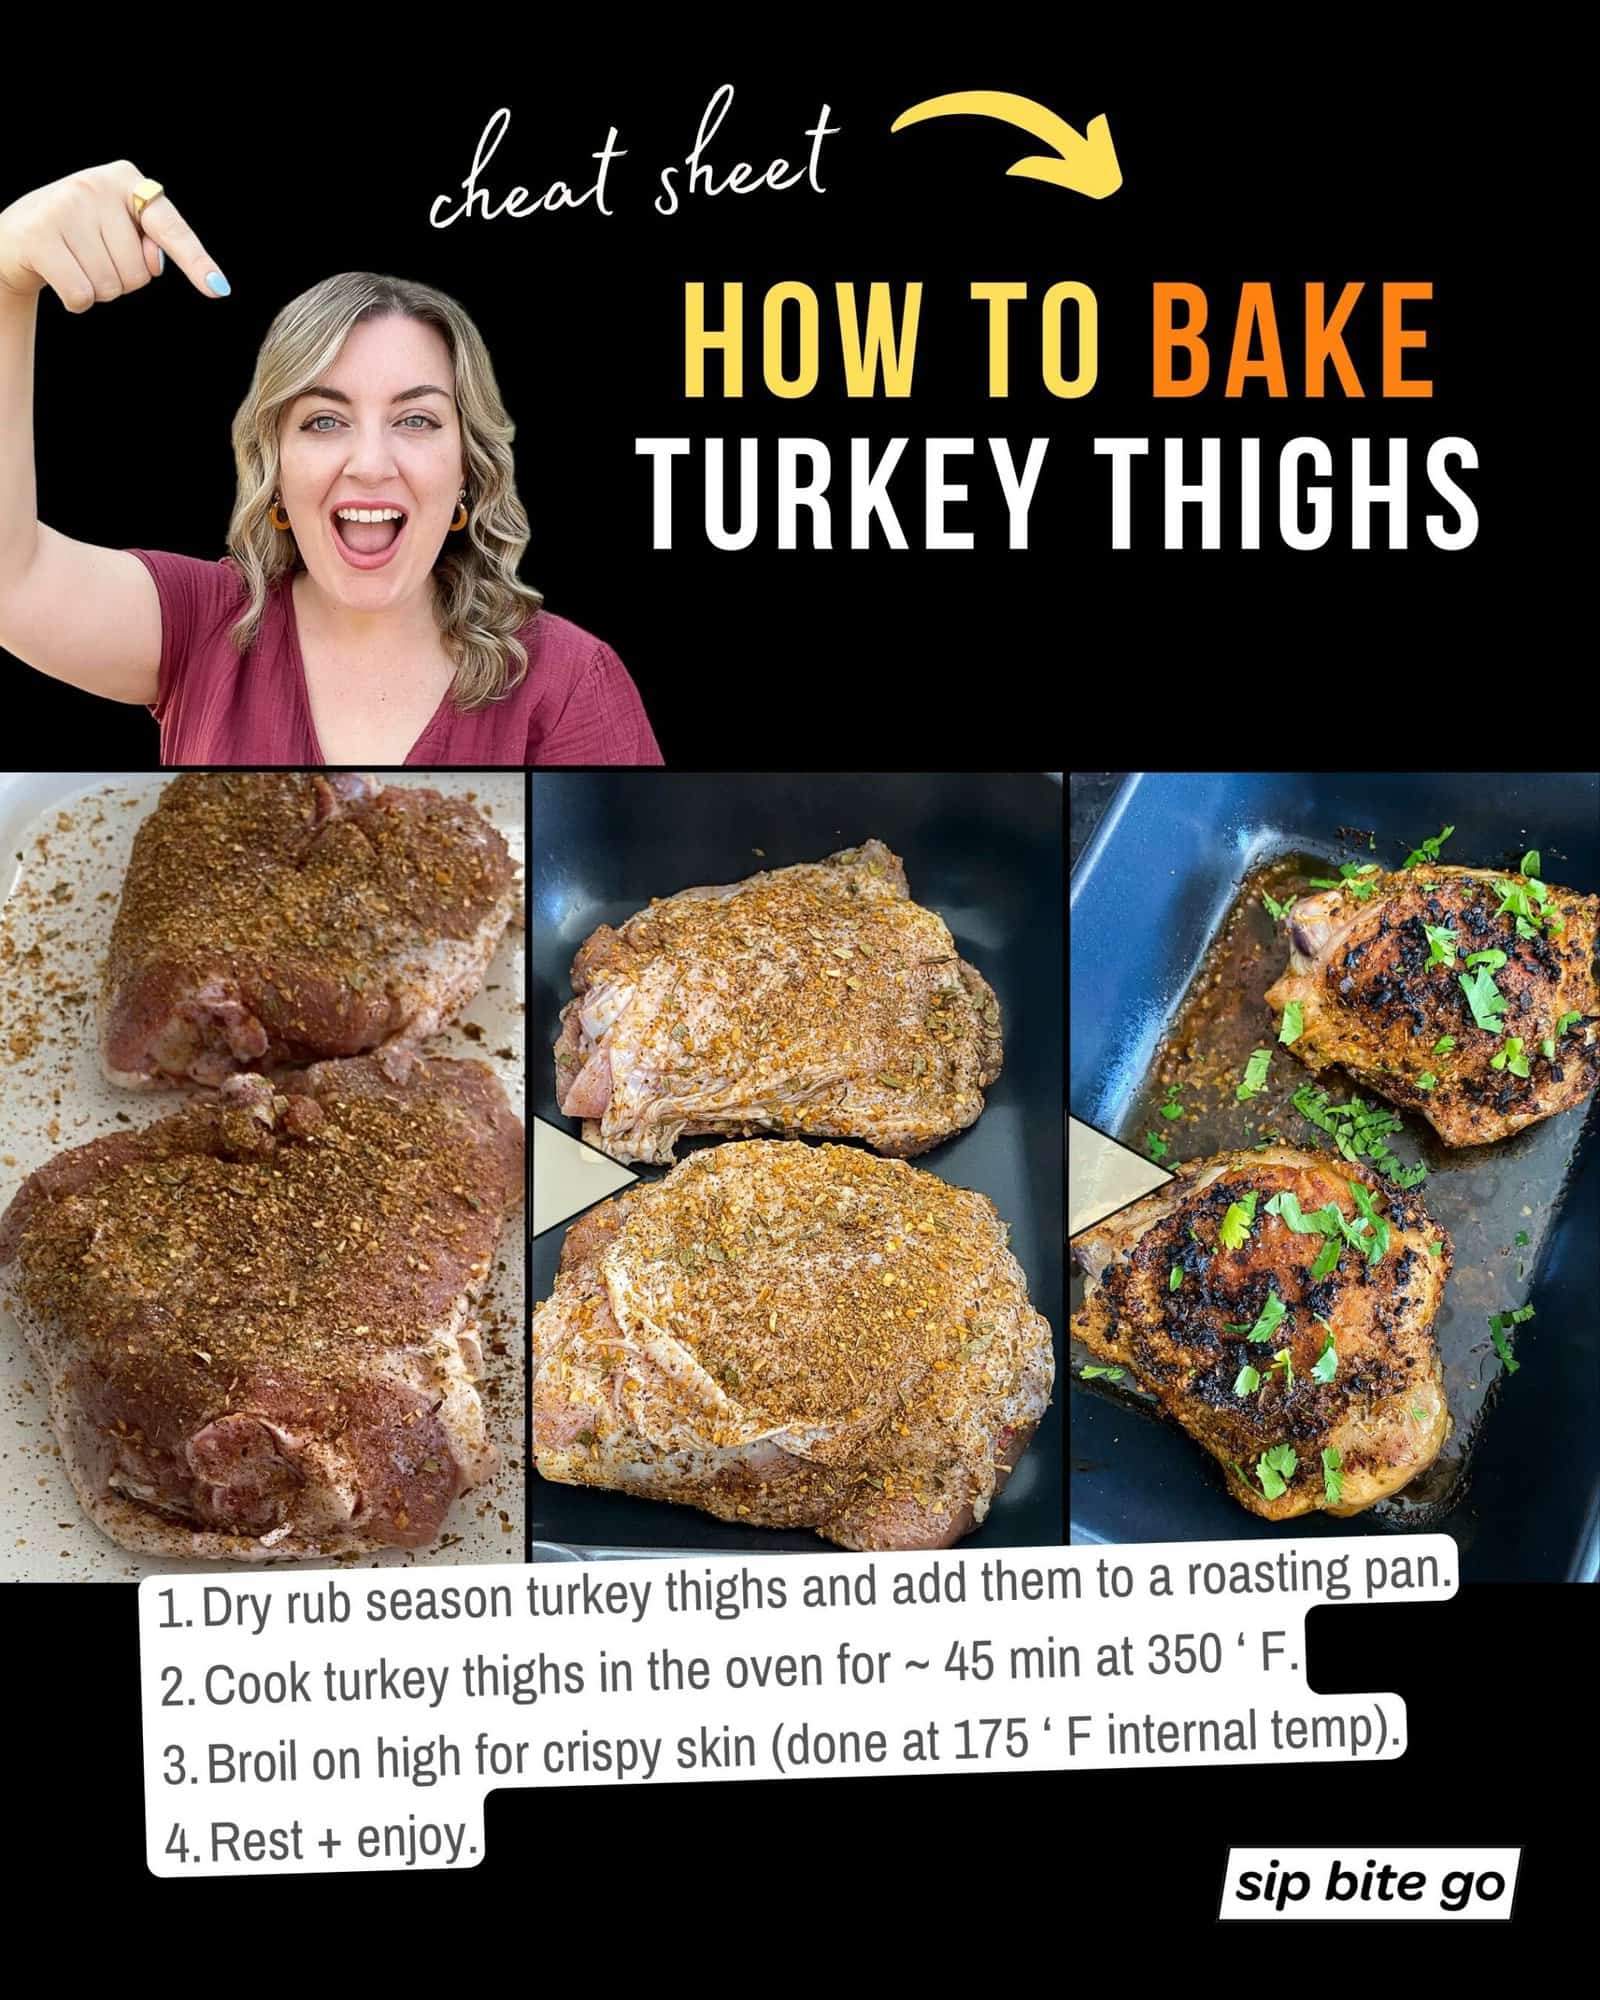 Infographic with recipe steps for baking turkey thighs in the oven